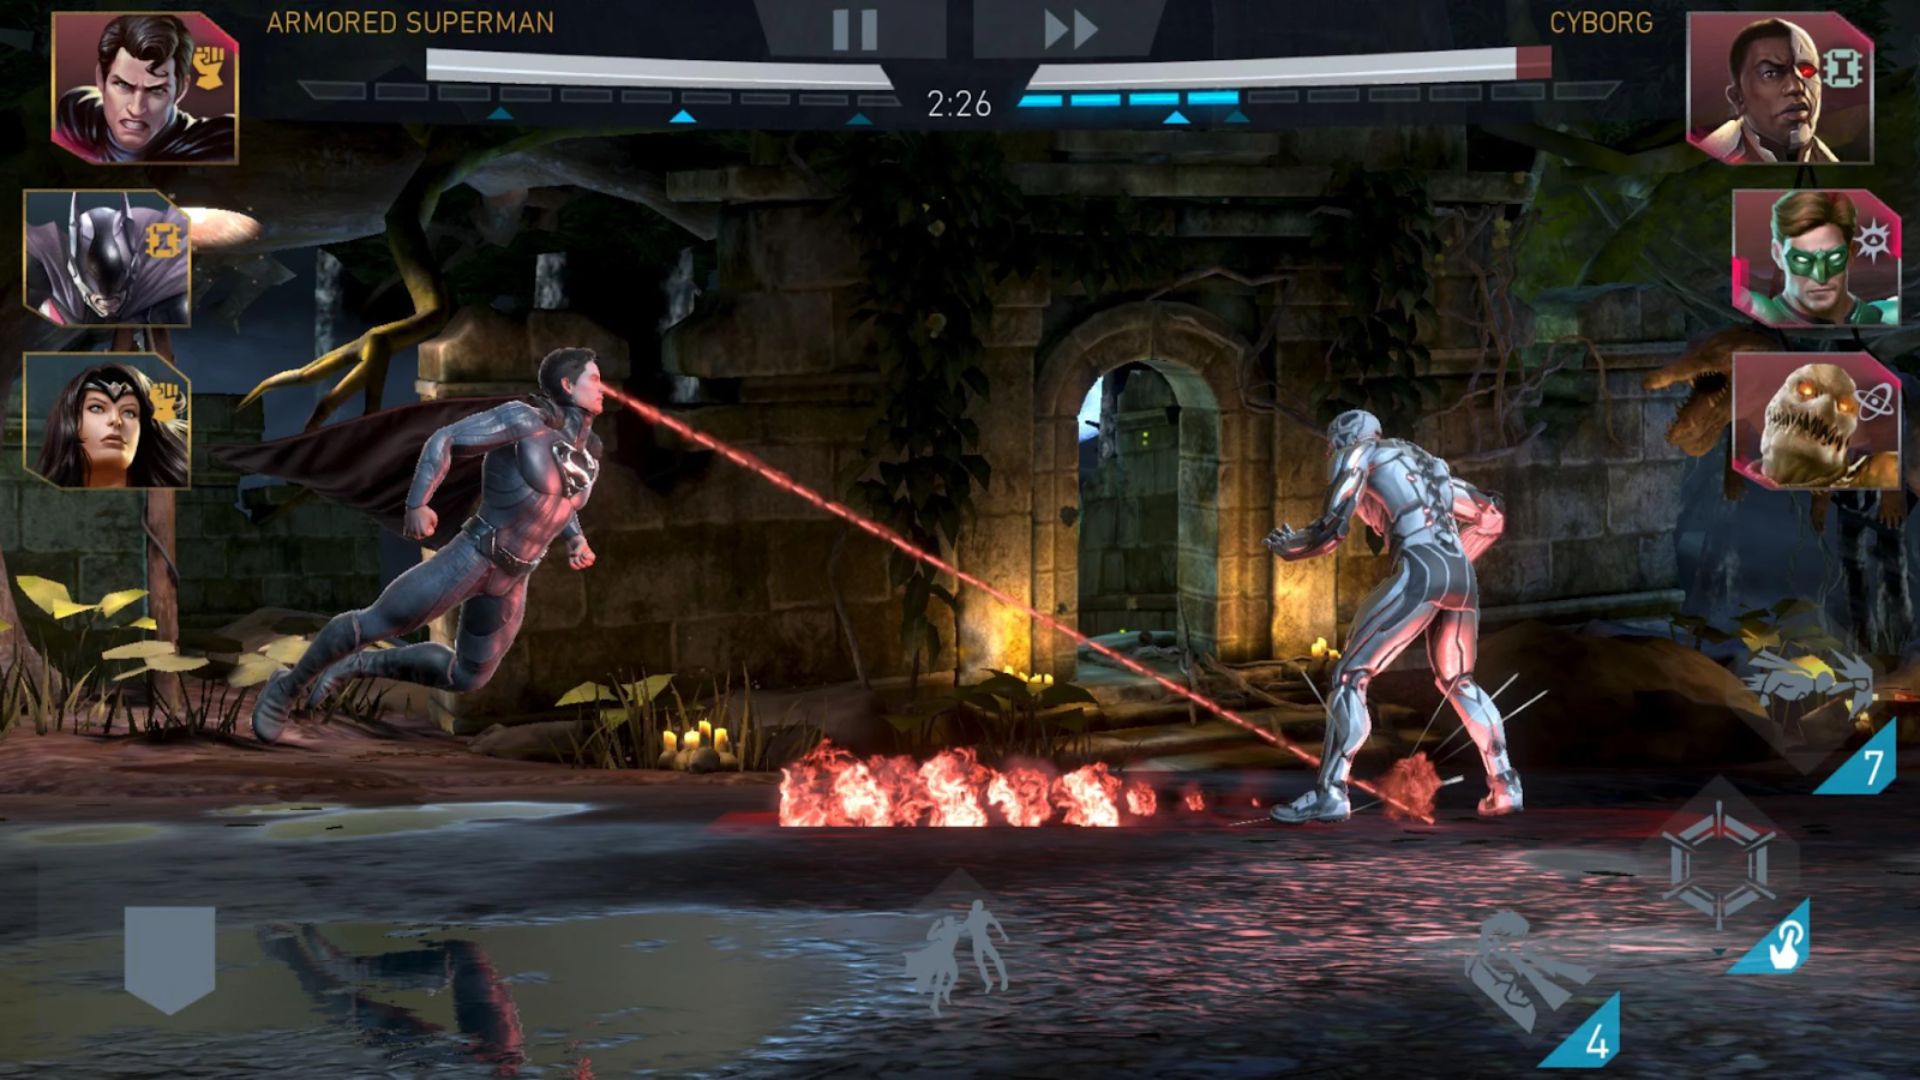 Batman games - Superman fires laser eyes at Cyborg in a side-on view of the two fighting.